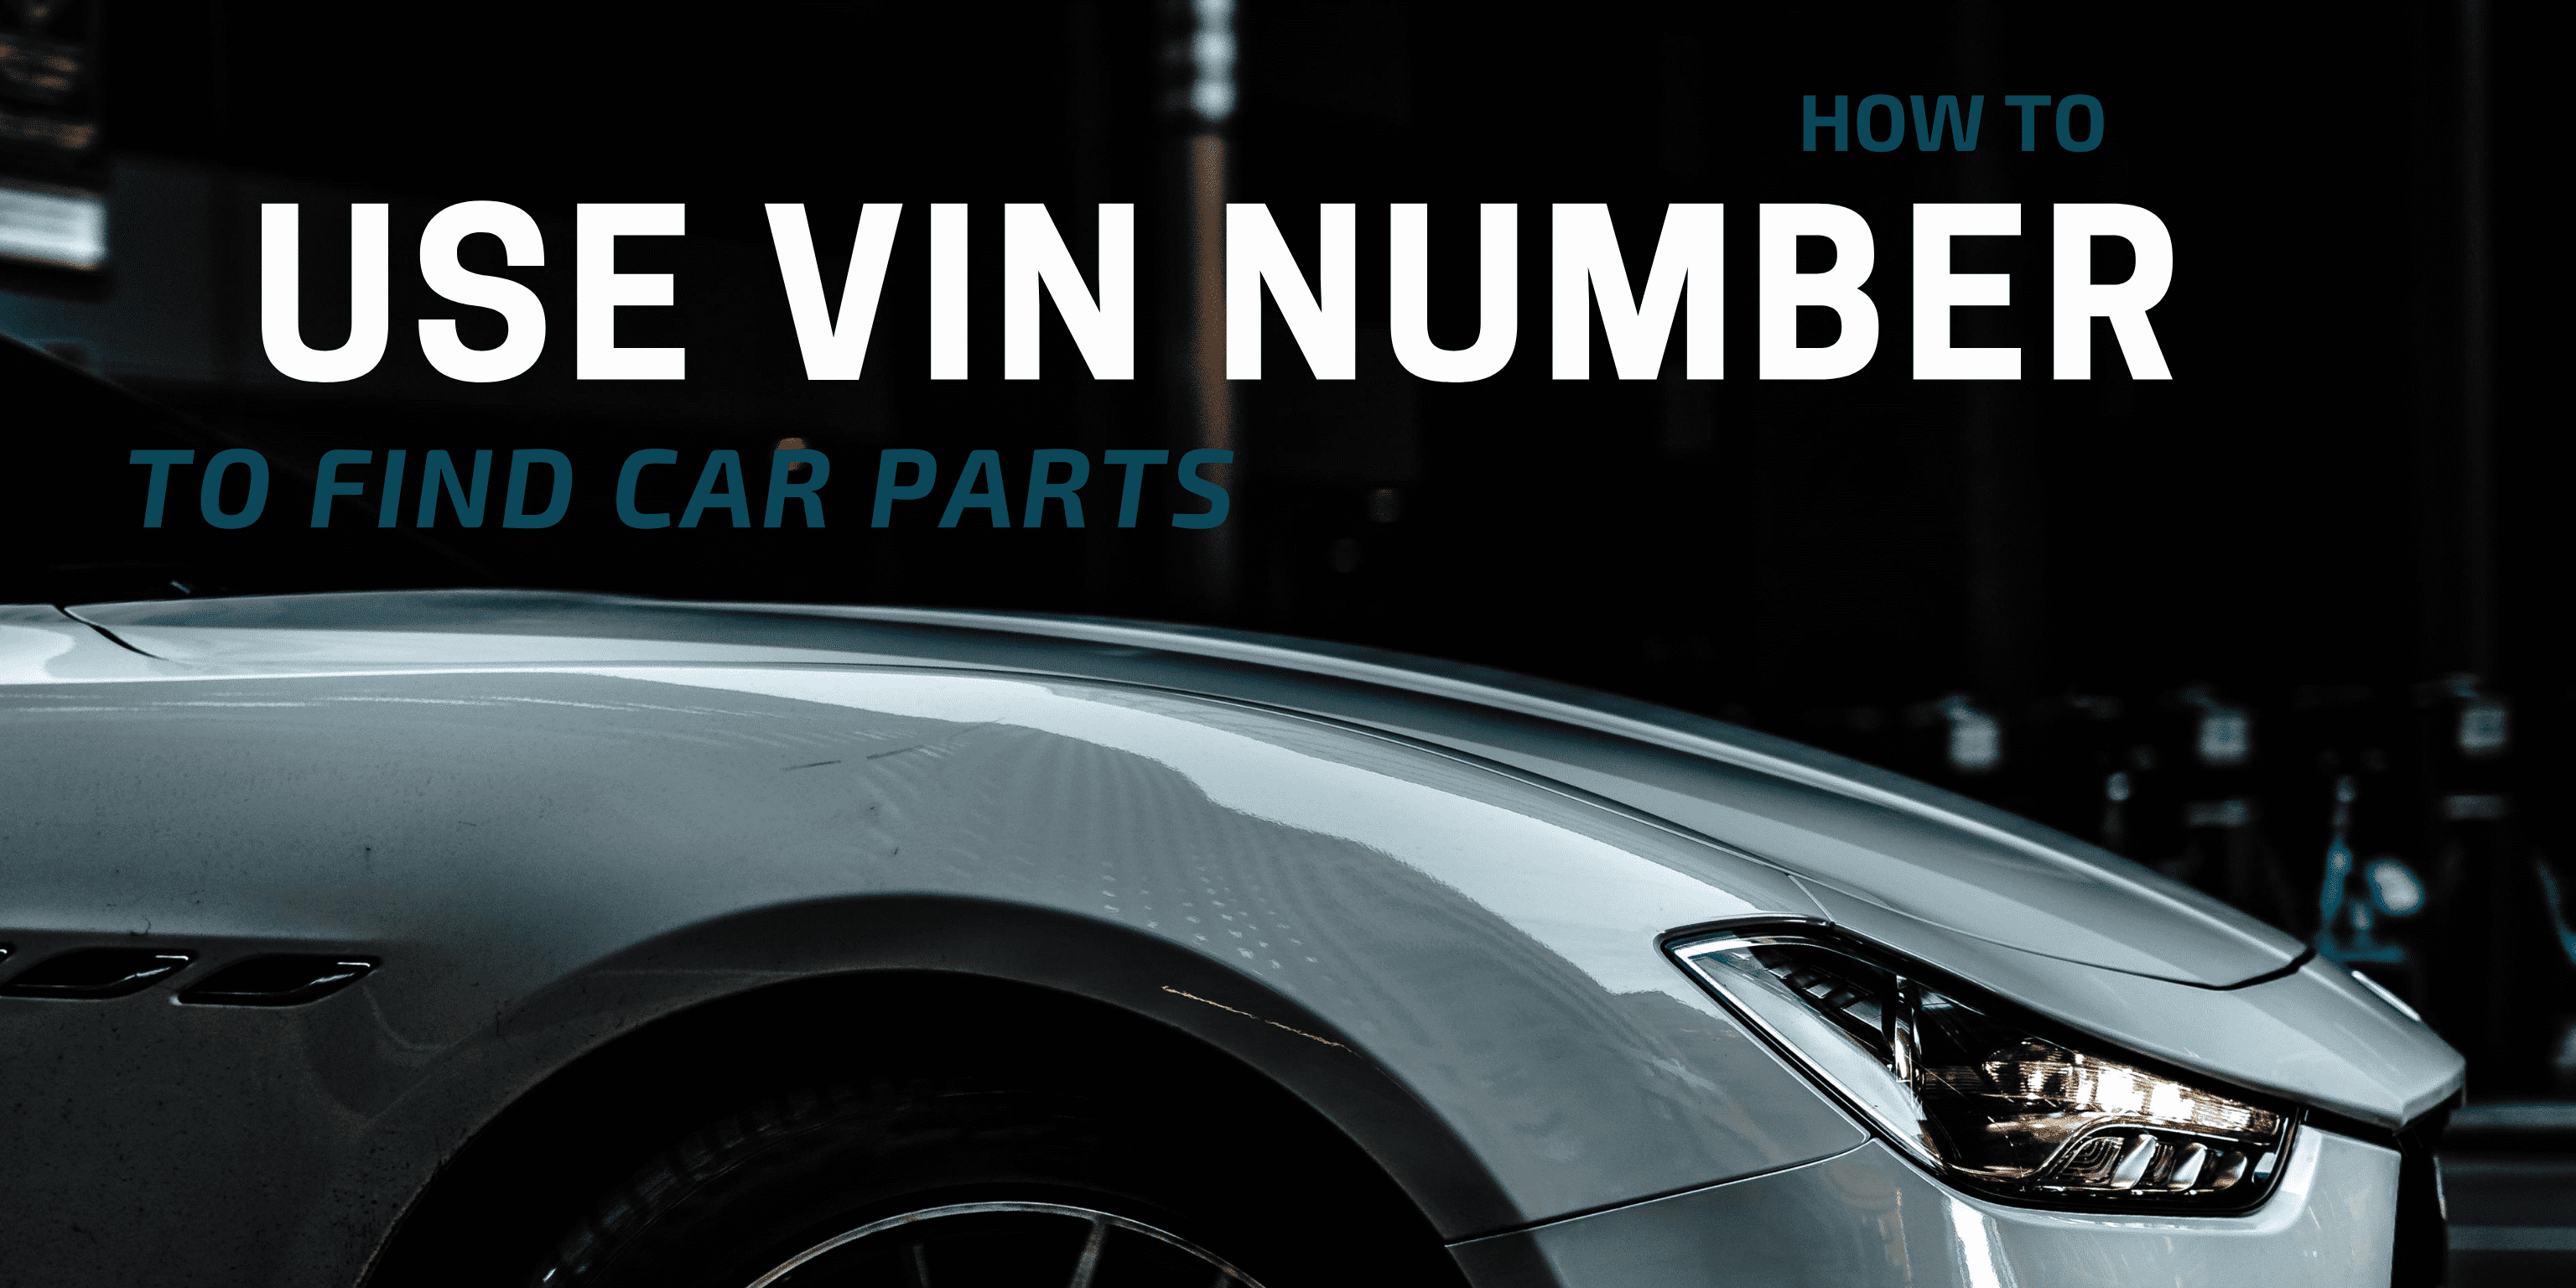 Easy Essential Tips for Identifying Car Parts Using the VIN Number While Shopping at a Junkyard